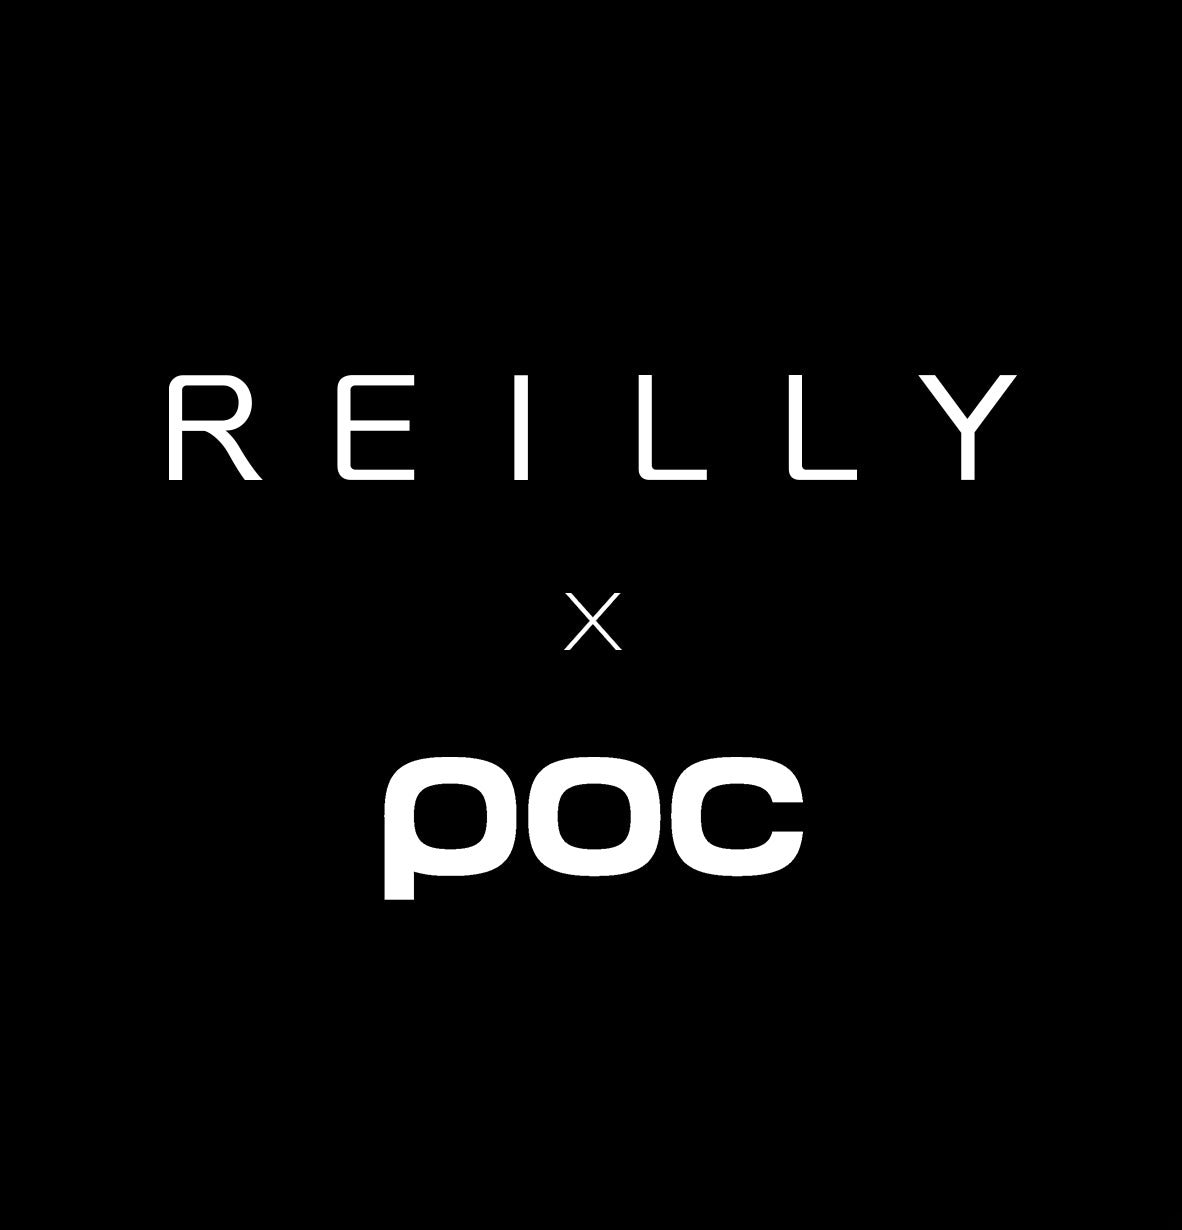 On a black background are the words REILLY X POC 